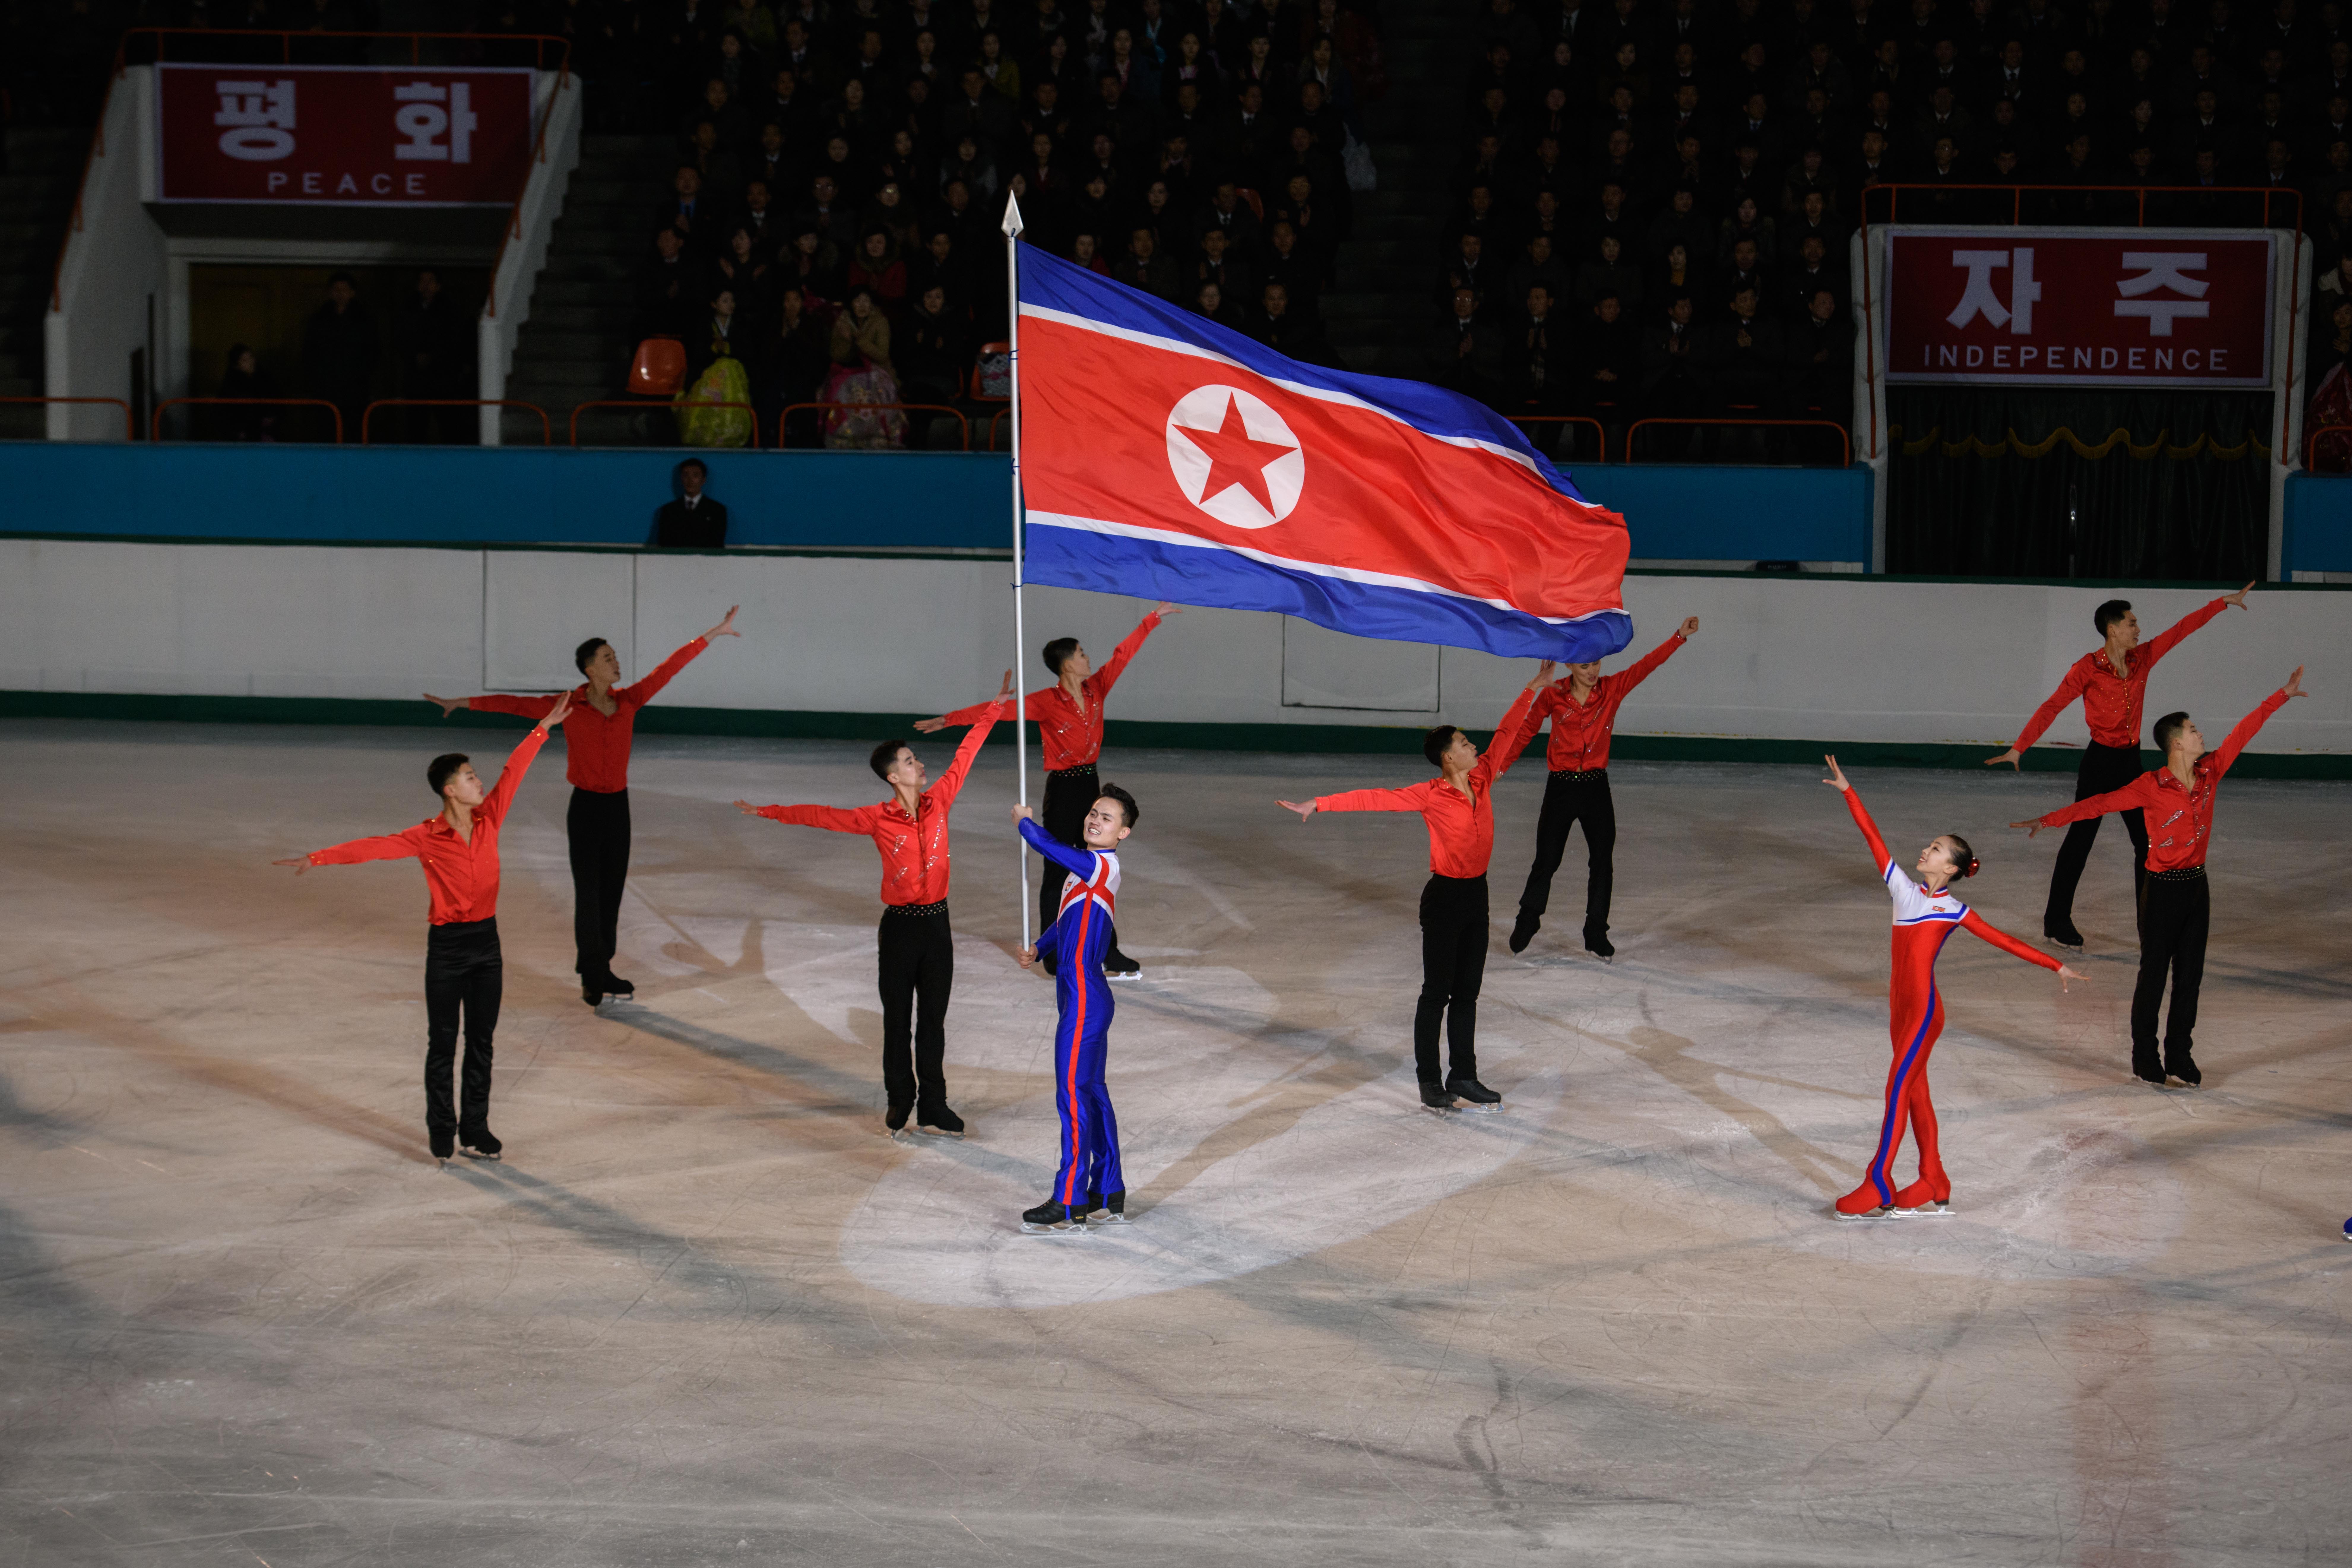 Olympic ice skater Kim Ju Sik (centre L) of North Korea holds a national flag during the '26th Paektusan Prize Figure Skating Festival in Celebration of the Day of the Shining Star' as part of celebrations marking the birthday of late North Korean leader Kim Jong Il, in Pyongyang photo.